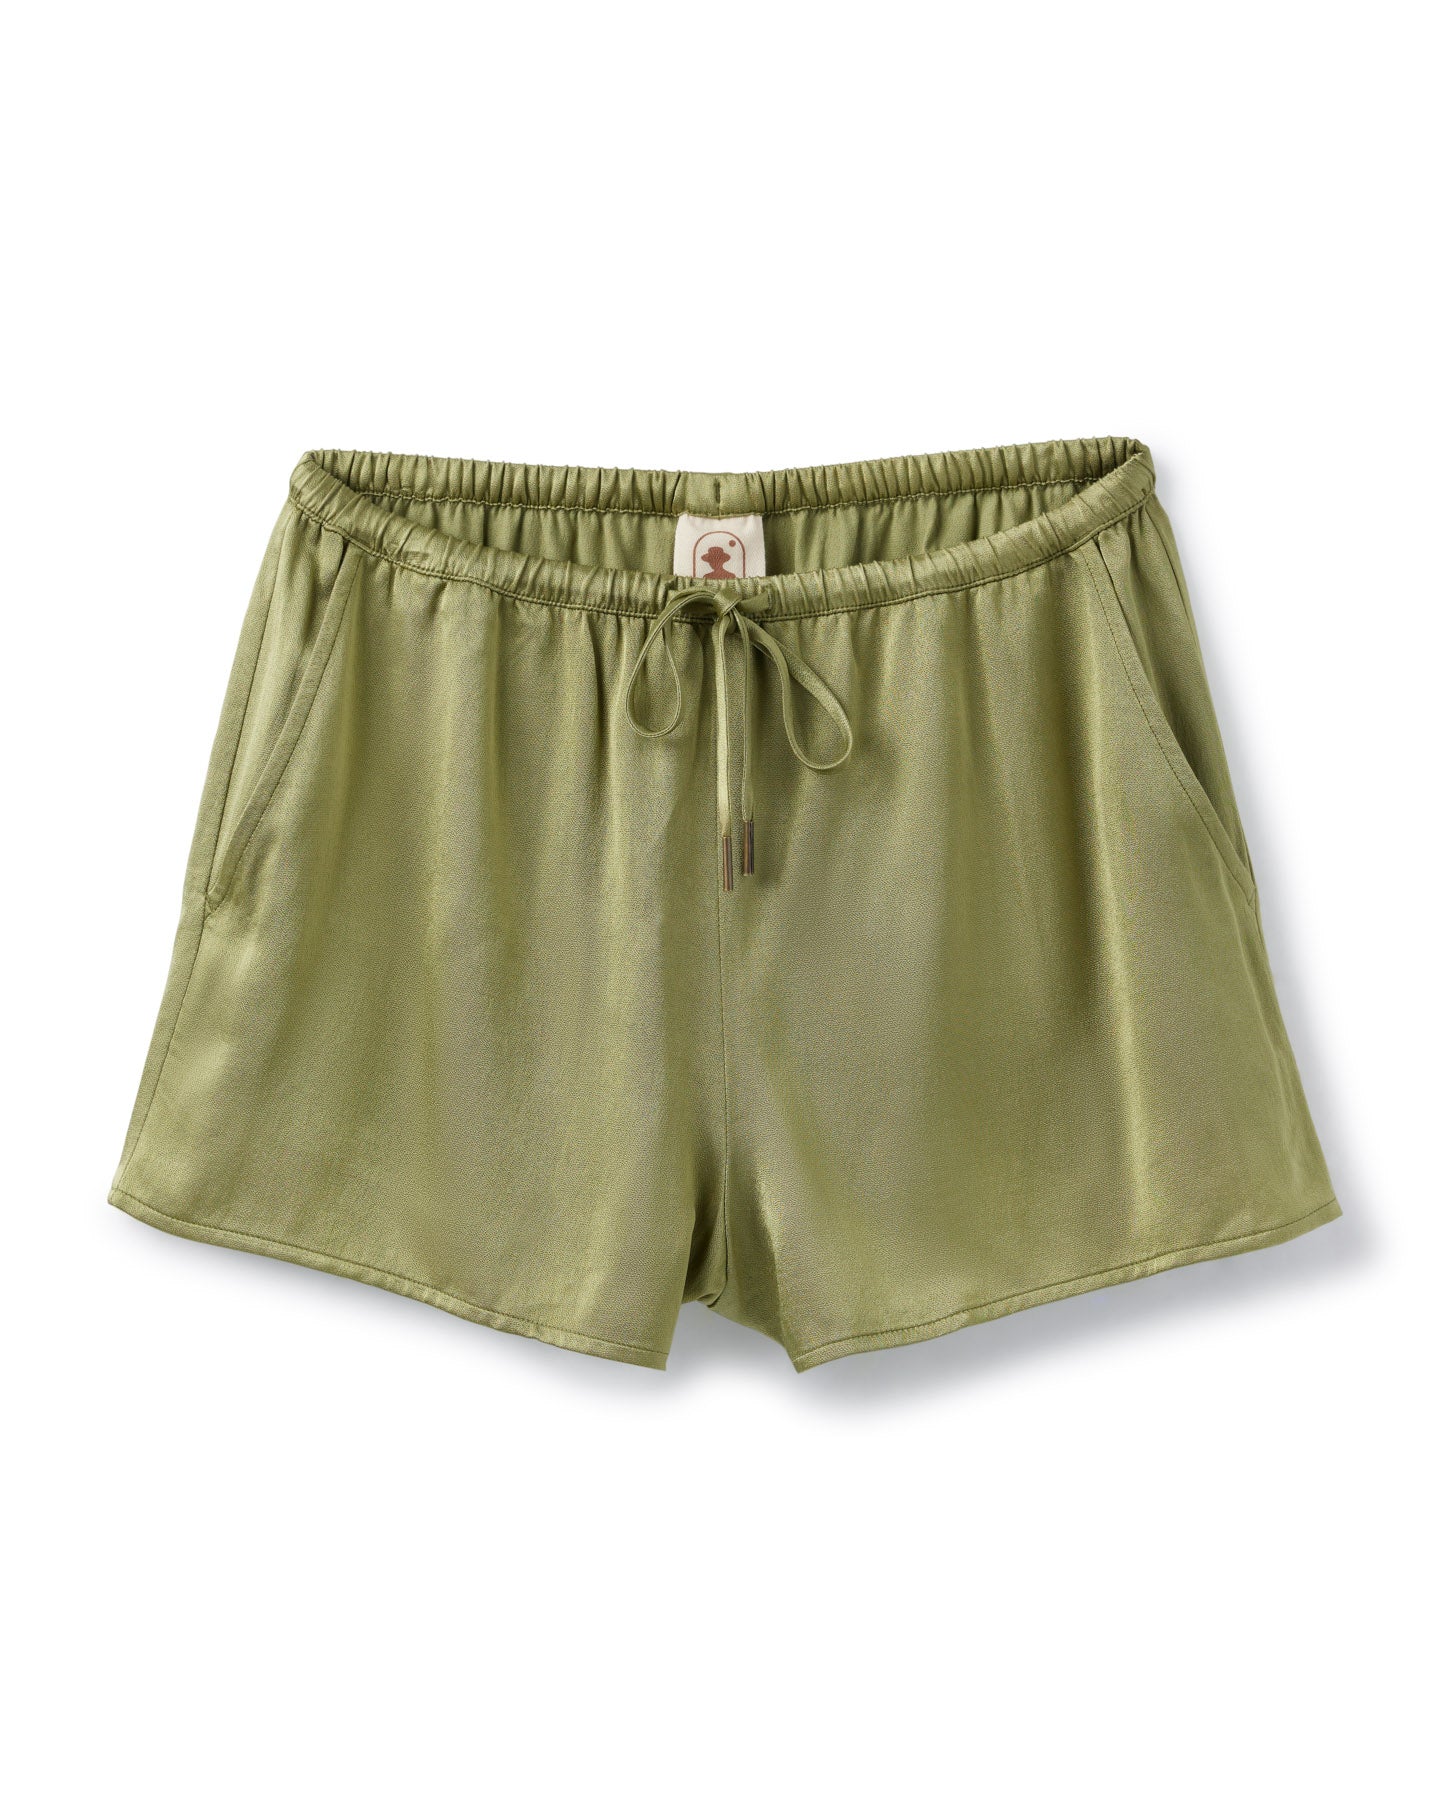 Saltwater Fiends Shorts, Quick Drying, Polyester Stretch Fabric, High-Wicking Fishing Shorts, Womens - Desolve Supply Co.